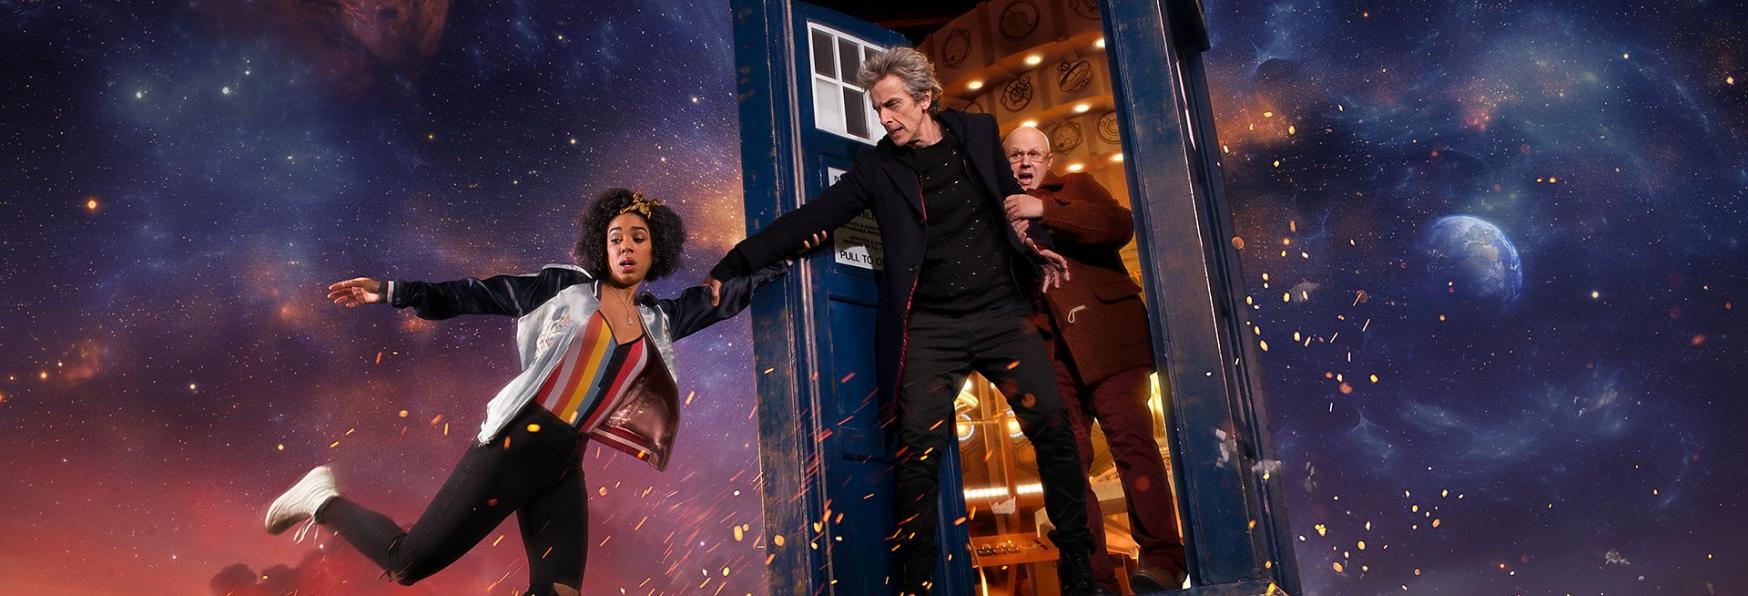 Doctor Who: according to Russell T. Davies new Spin-offs of the TV Series are on the way